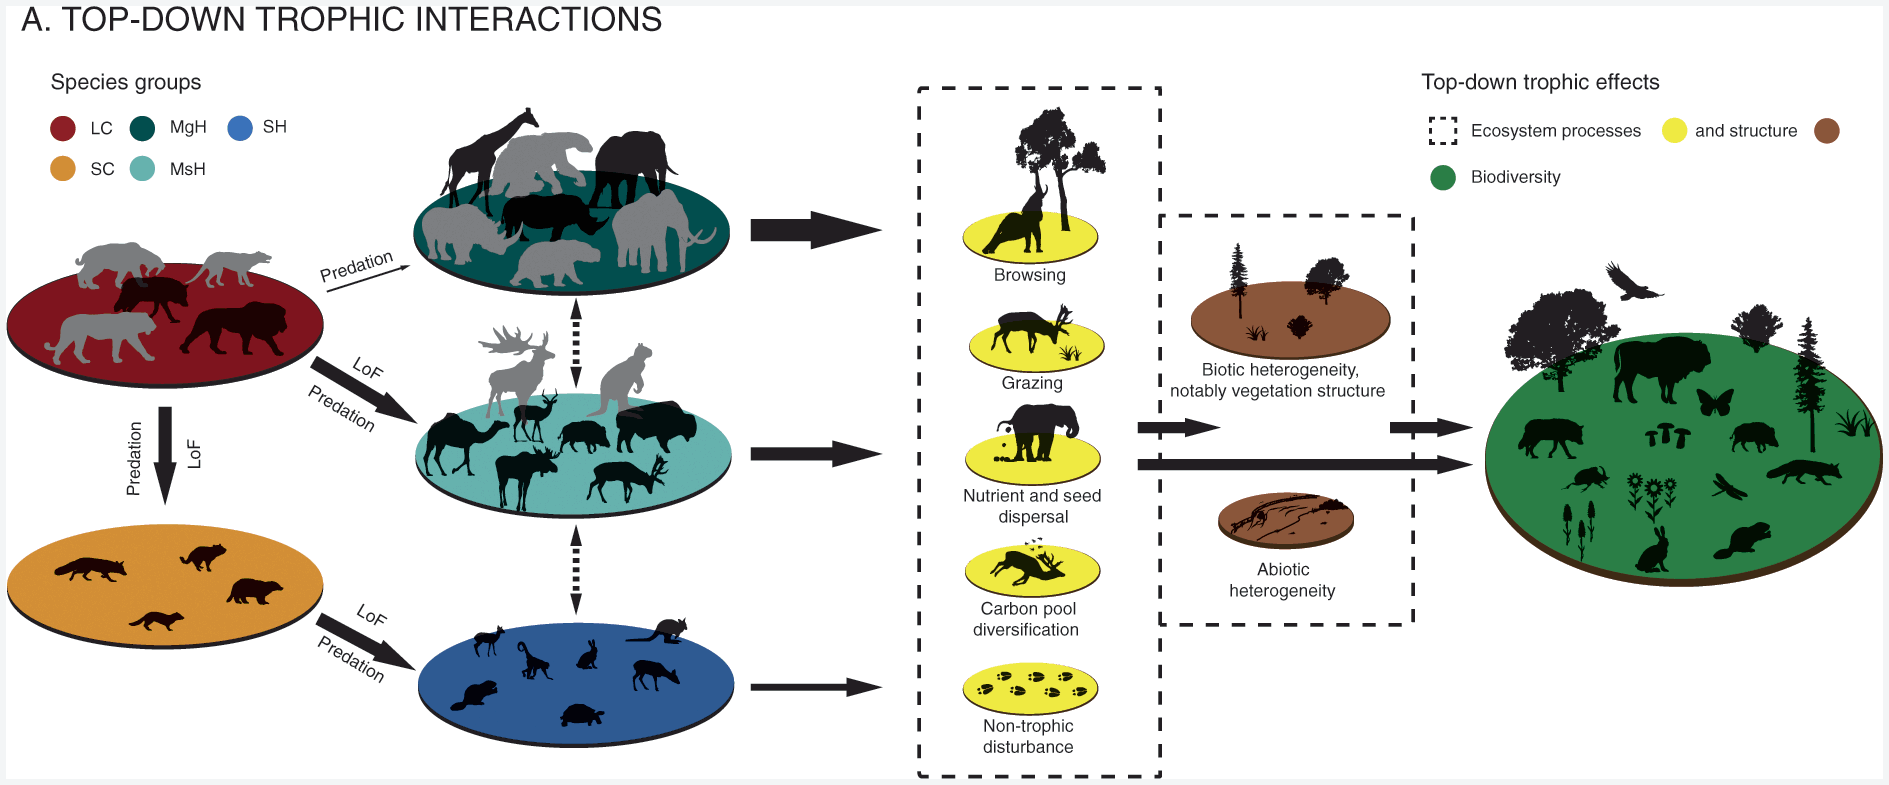 Trophic rewilding: ecological restoration of top-down trophic to promote self-regulating biodiverse ecosystems (Chapter Five) - Rewilding